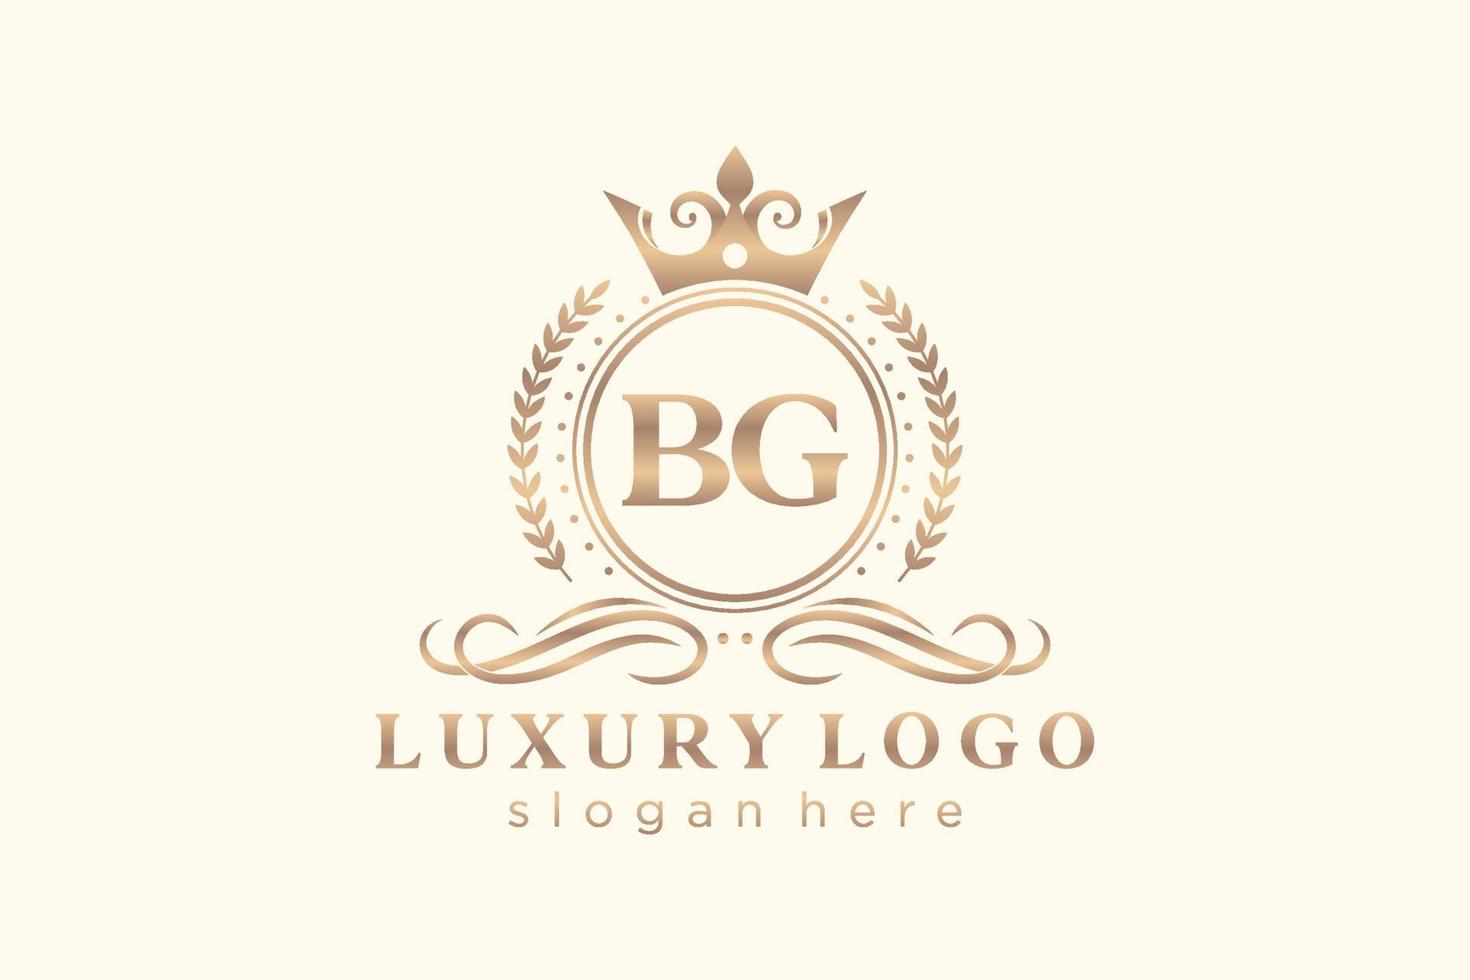 Initial BG Letter Royal Luxury Logo template in vector art for Restaurant, Royalty, Boutique, Cafe, Hotel, Heraldic, Jewelry, Fashion and other vector illustration.